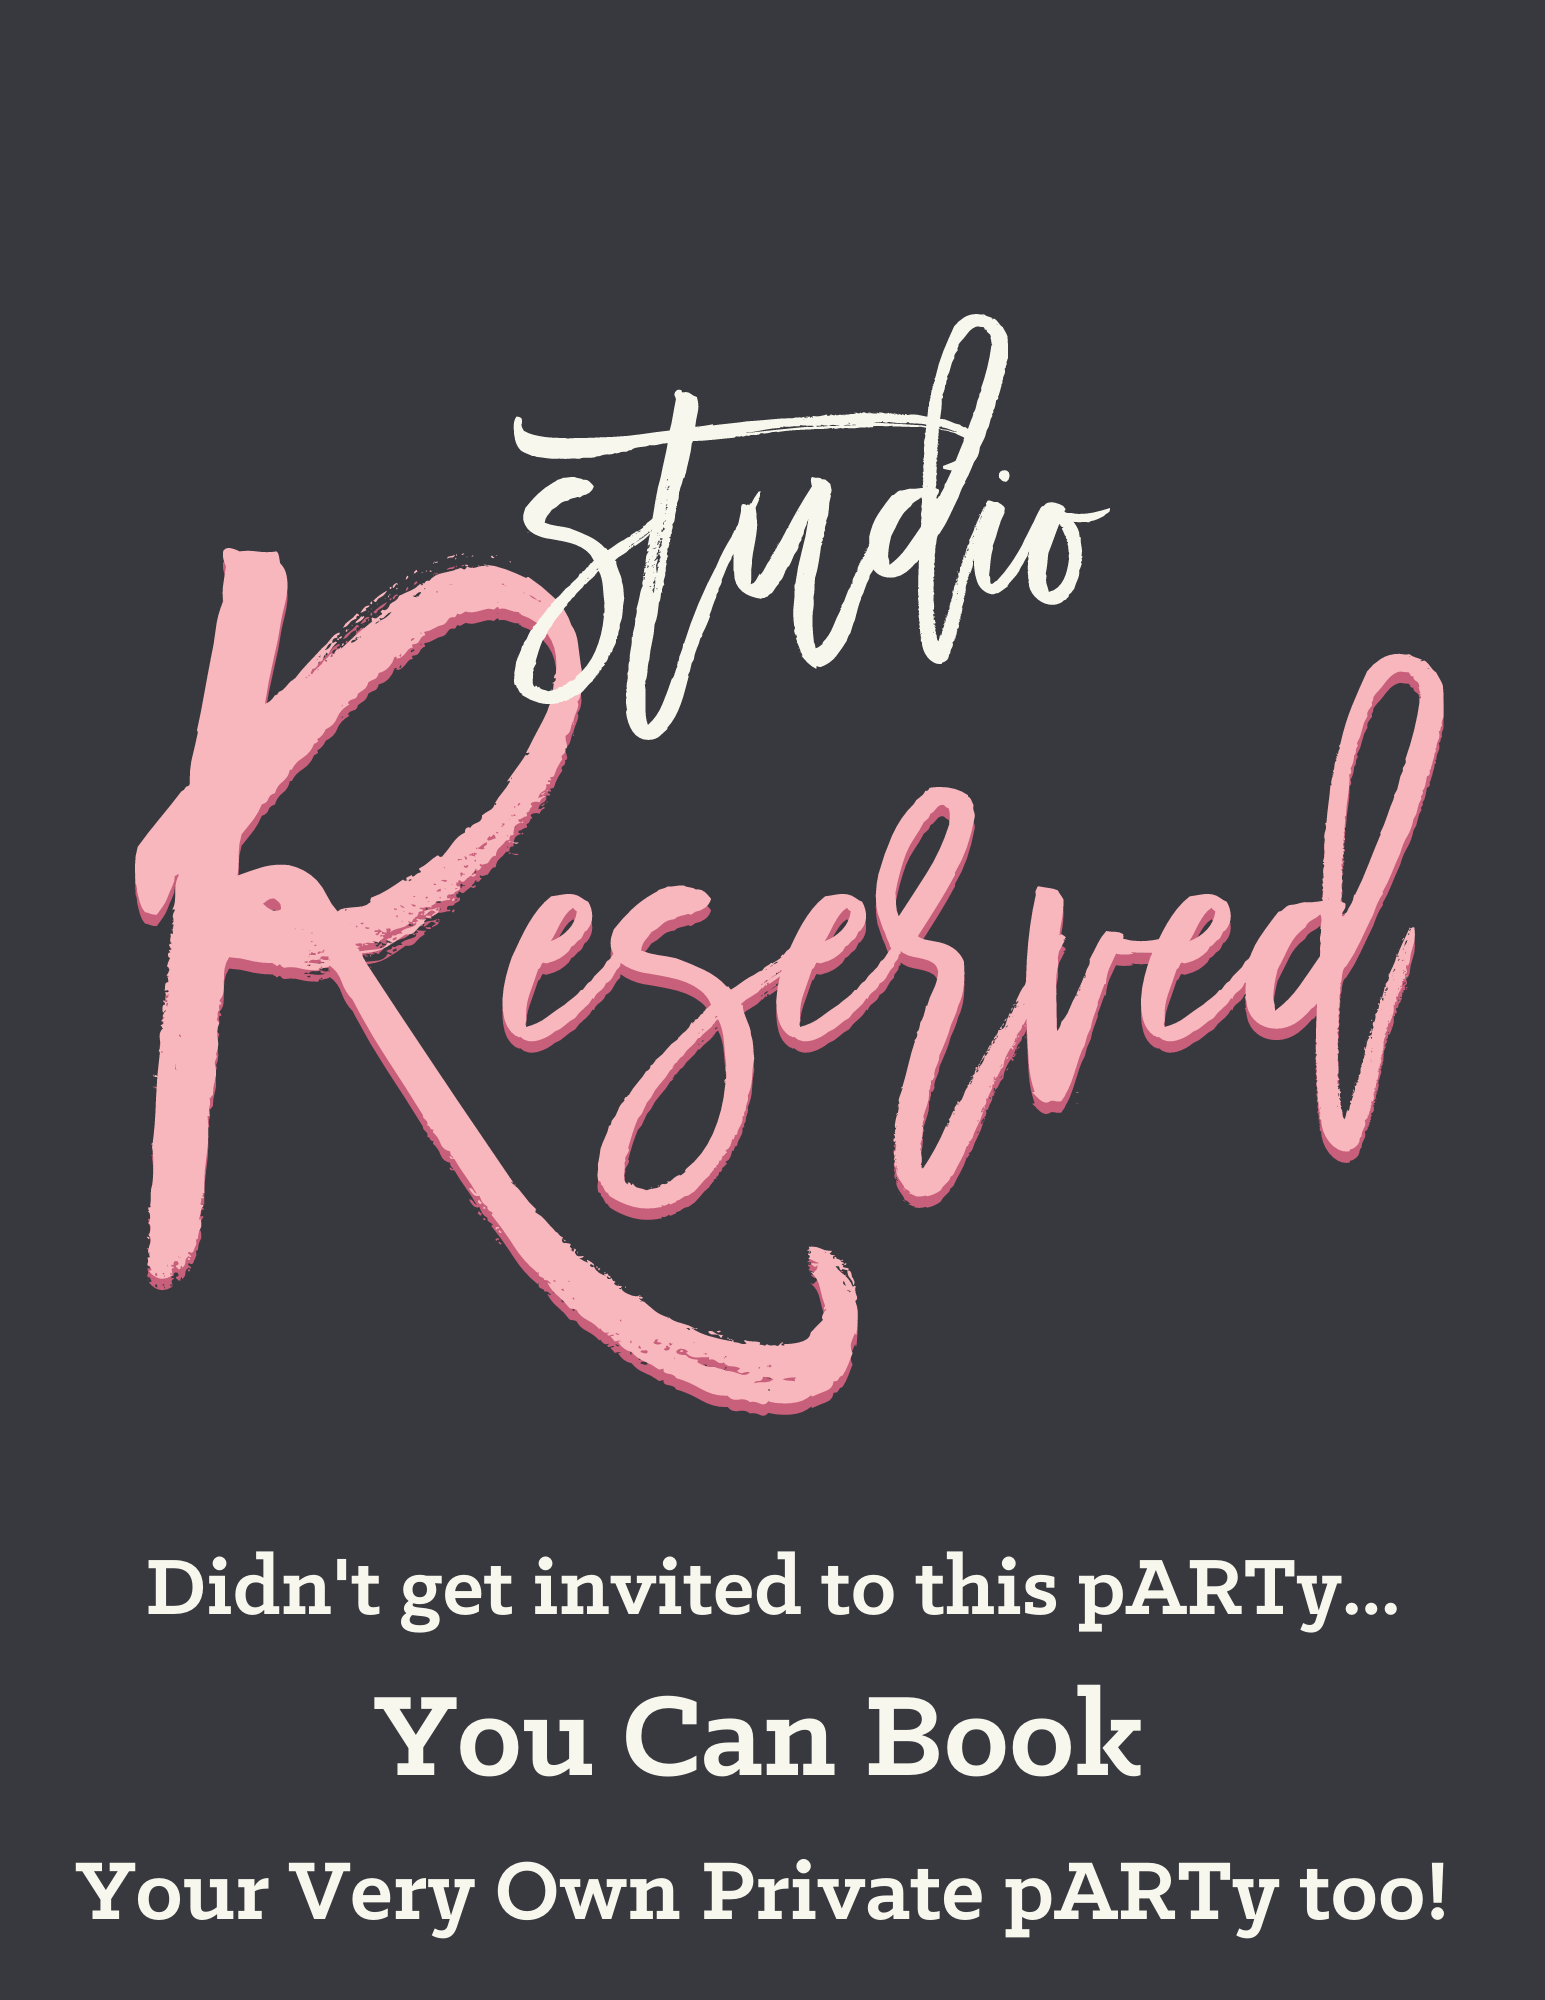 Studio Reserved for a Private pARTy